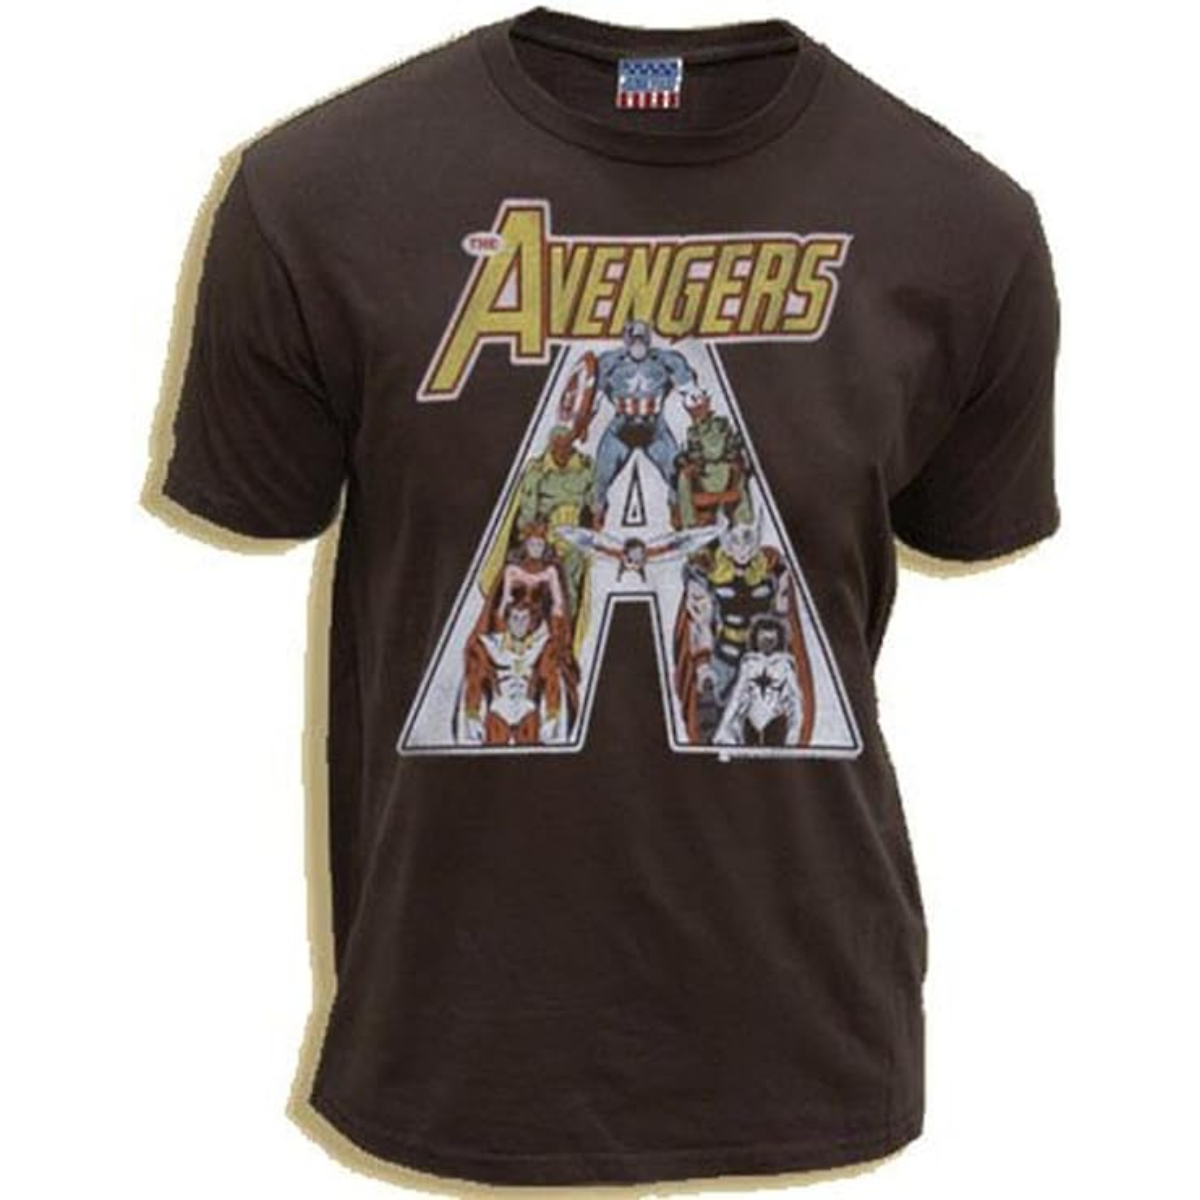 The Avengers Vintage Washed Black Adult T-Shirt Tee